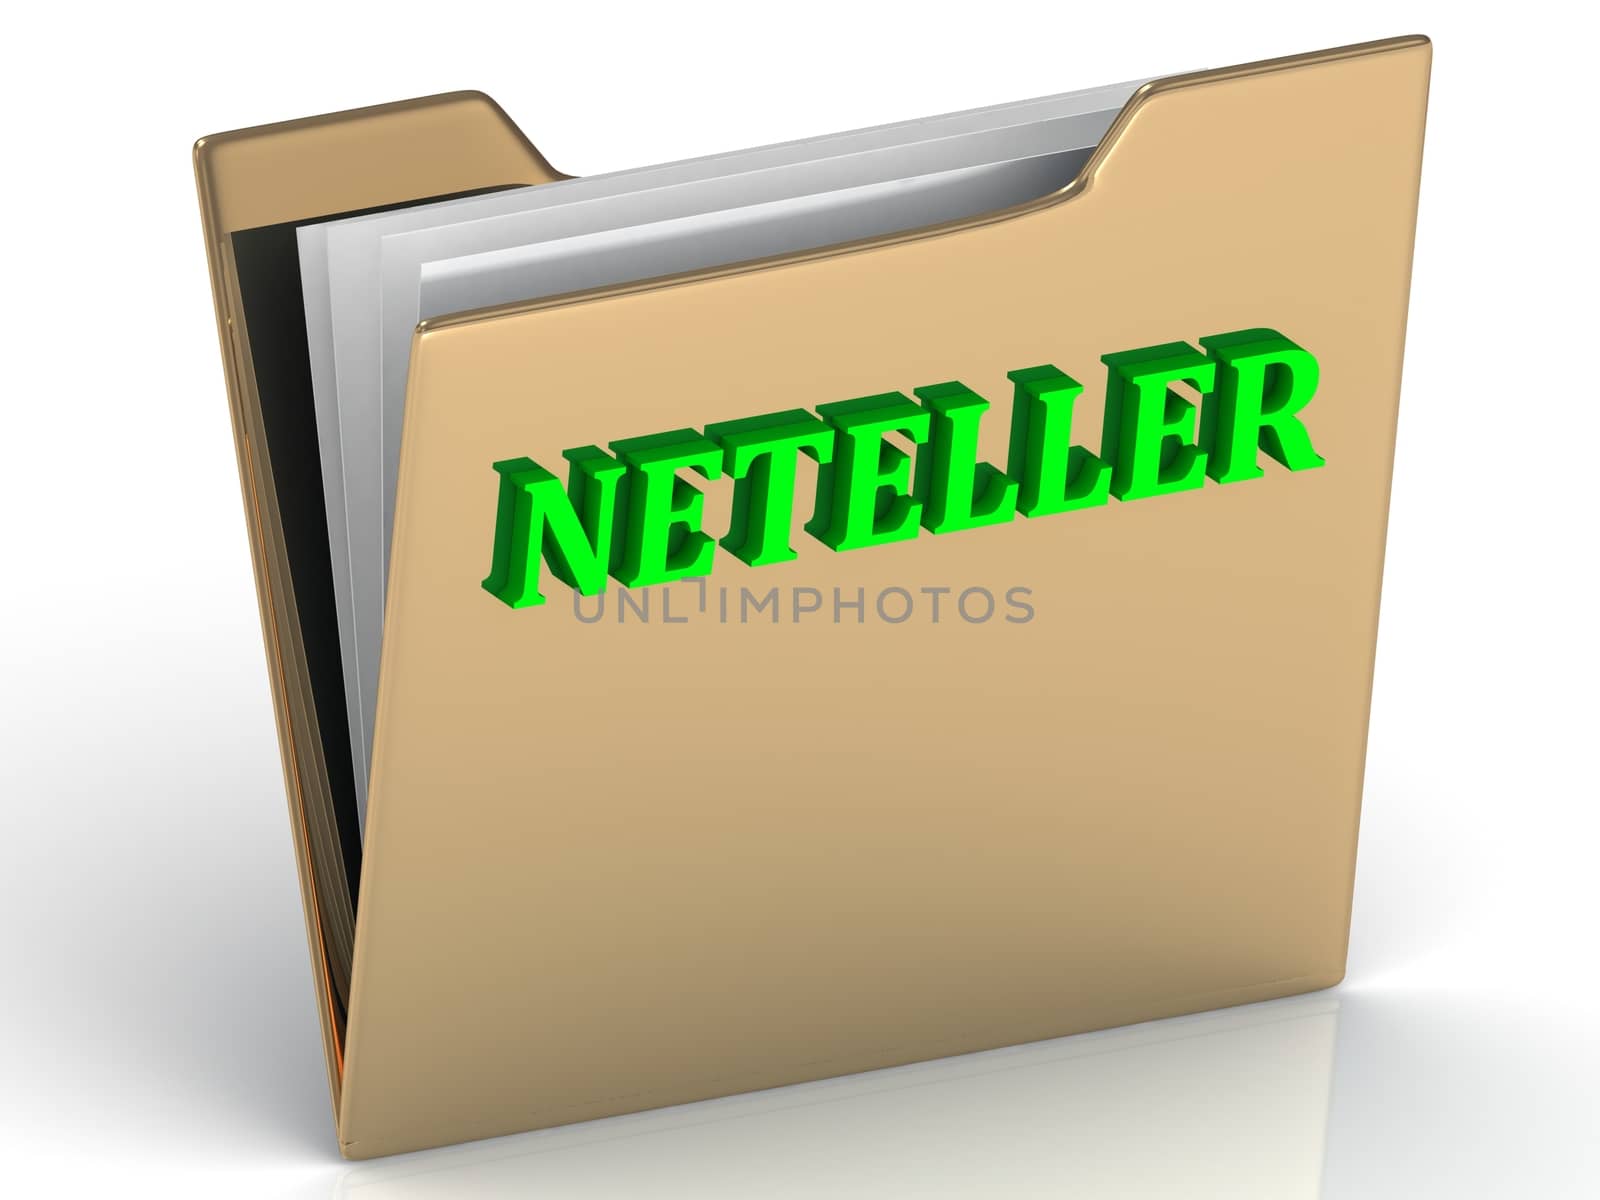 NETELLER - bright letters on a gold folder by GreenMost